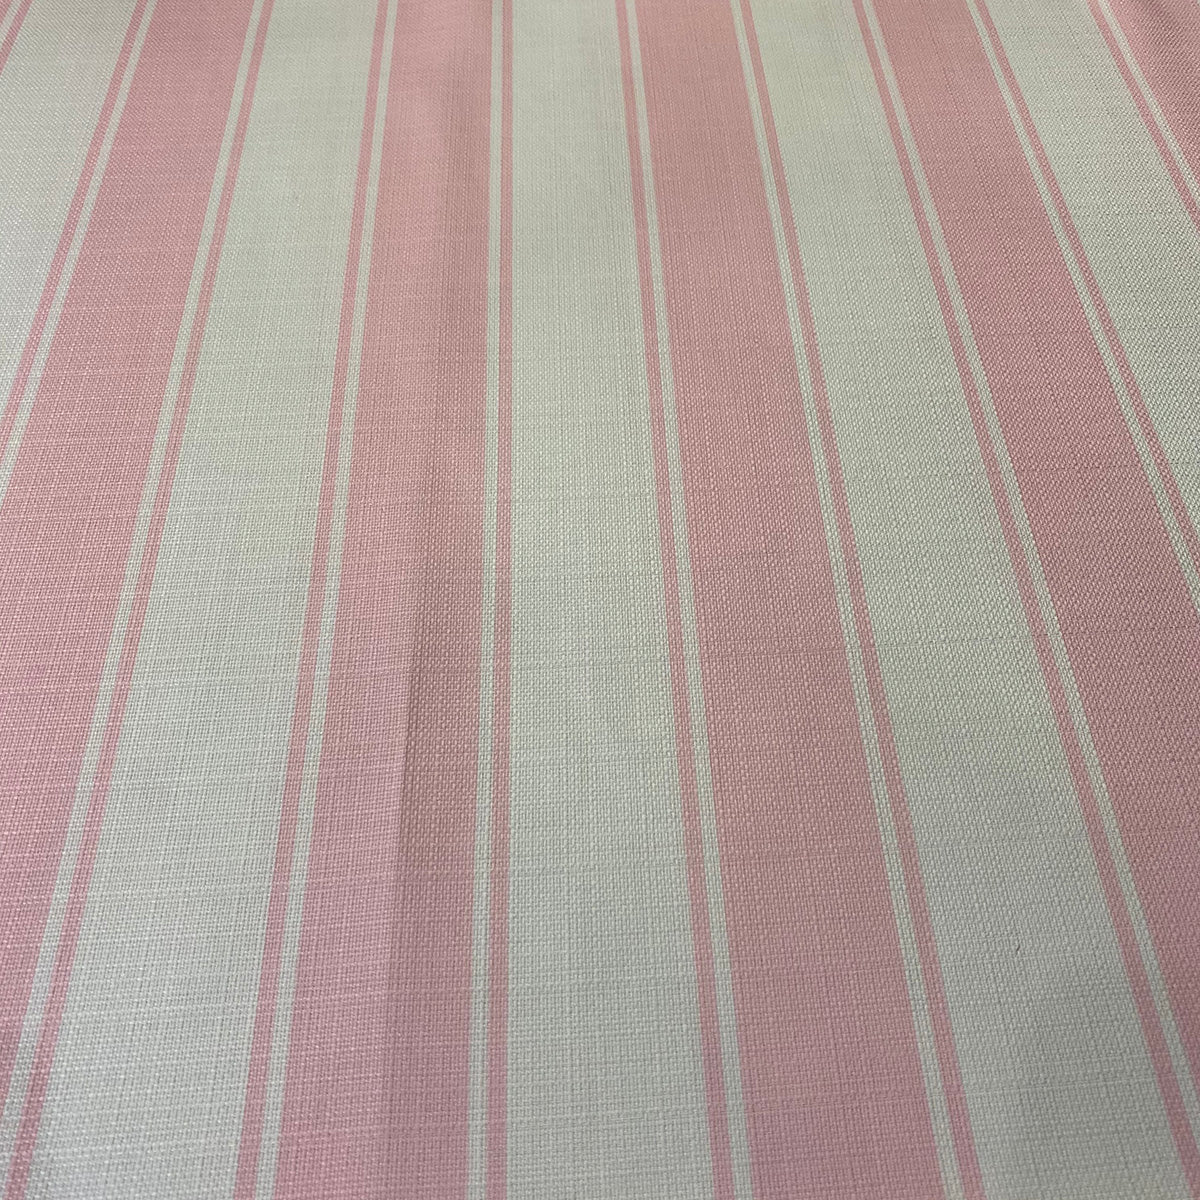 Hot Pink and White Awning Stripe - Lendable Linens